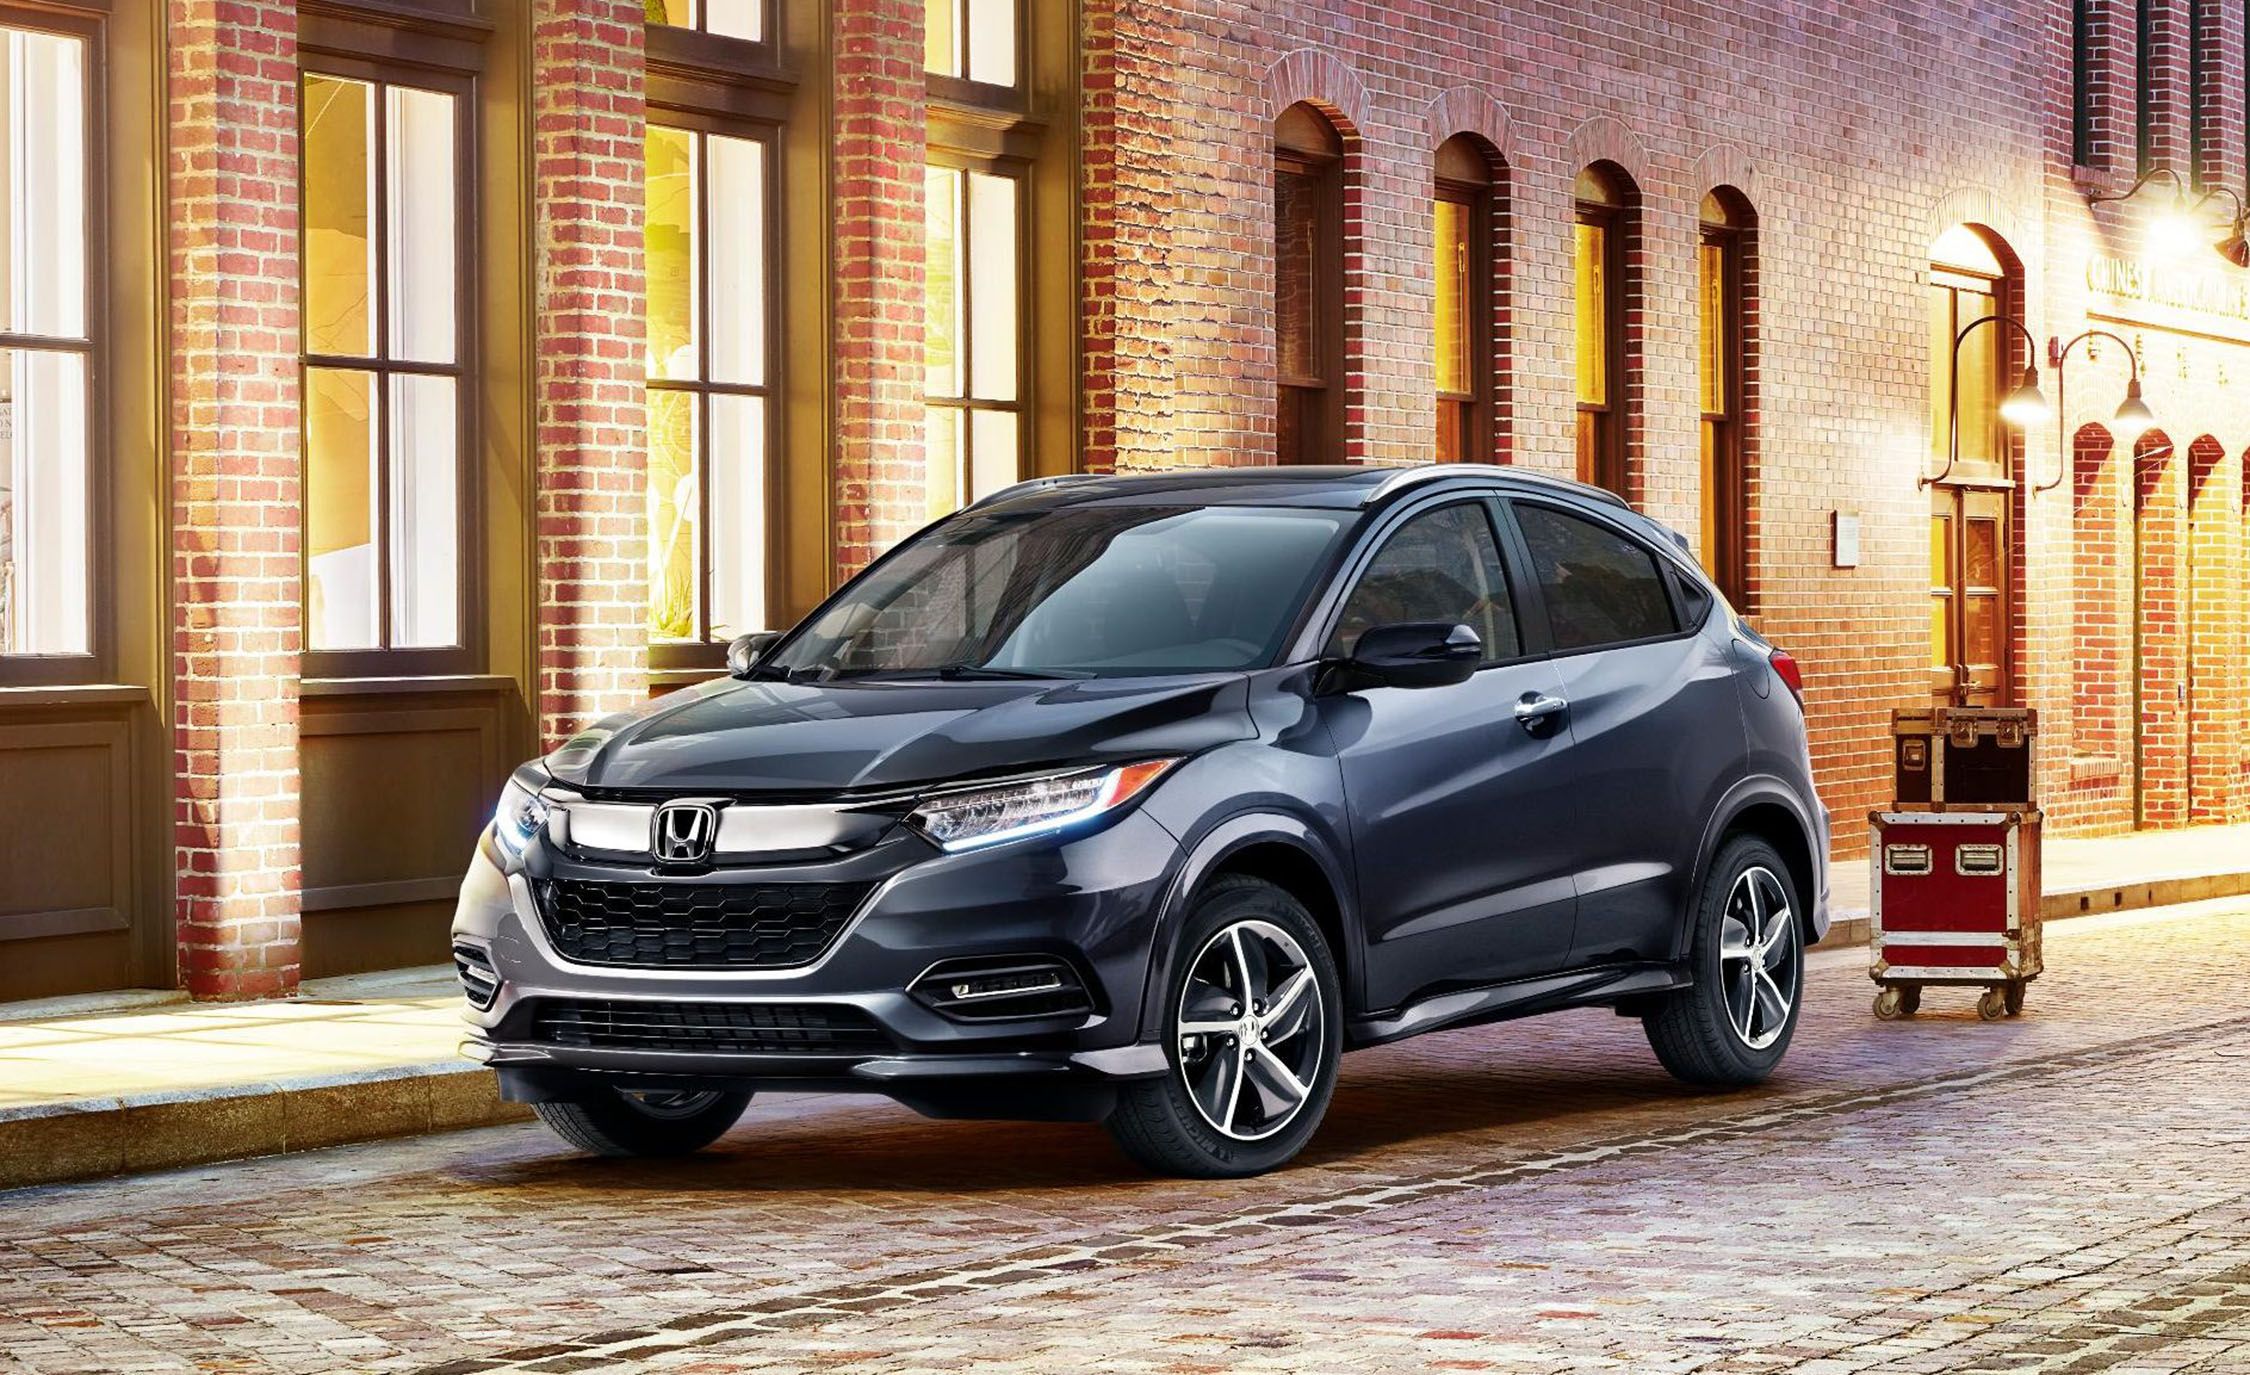 2019 Honda HR-V Updated with New Looks, New Tech | News | Car and Driver